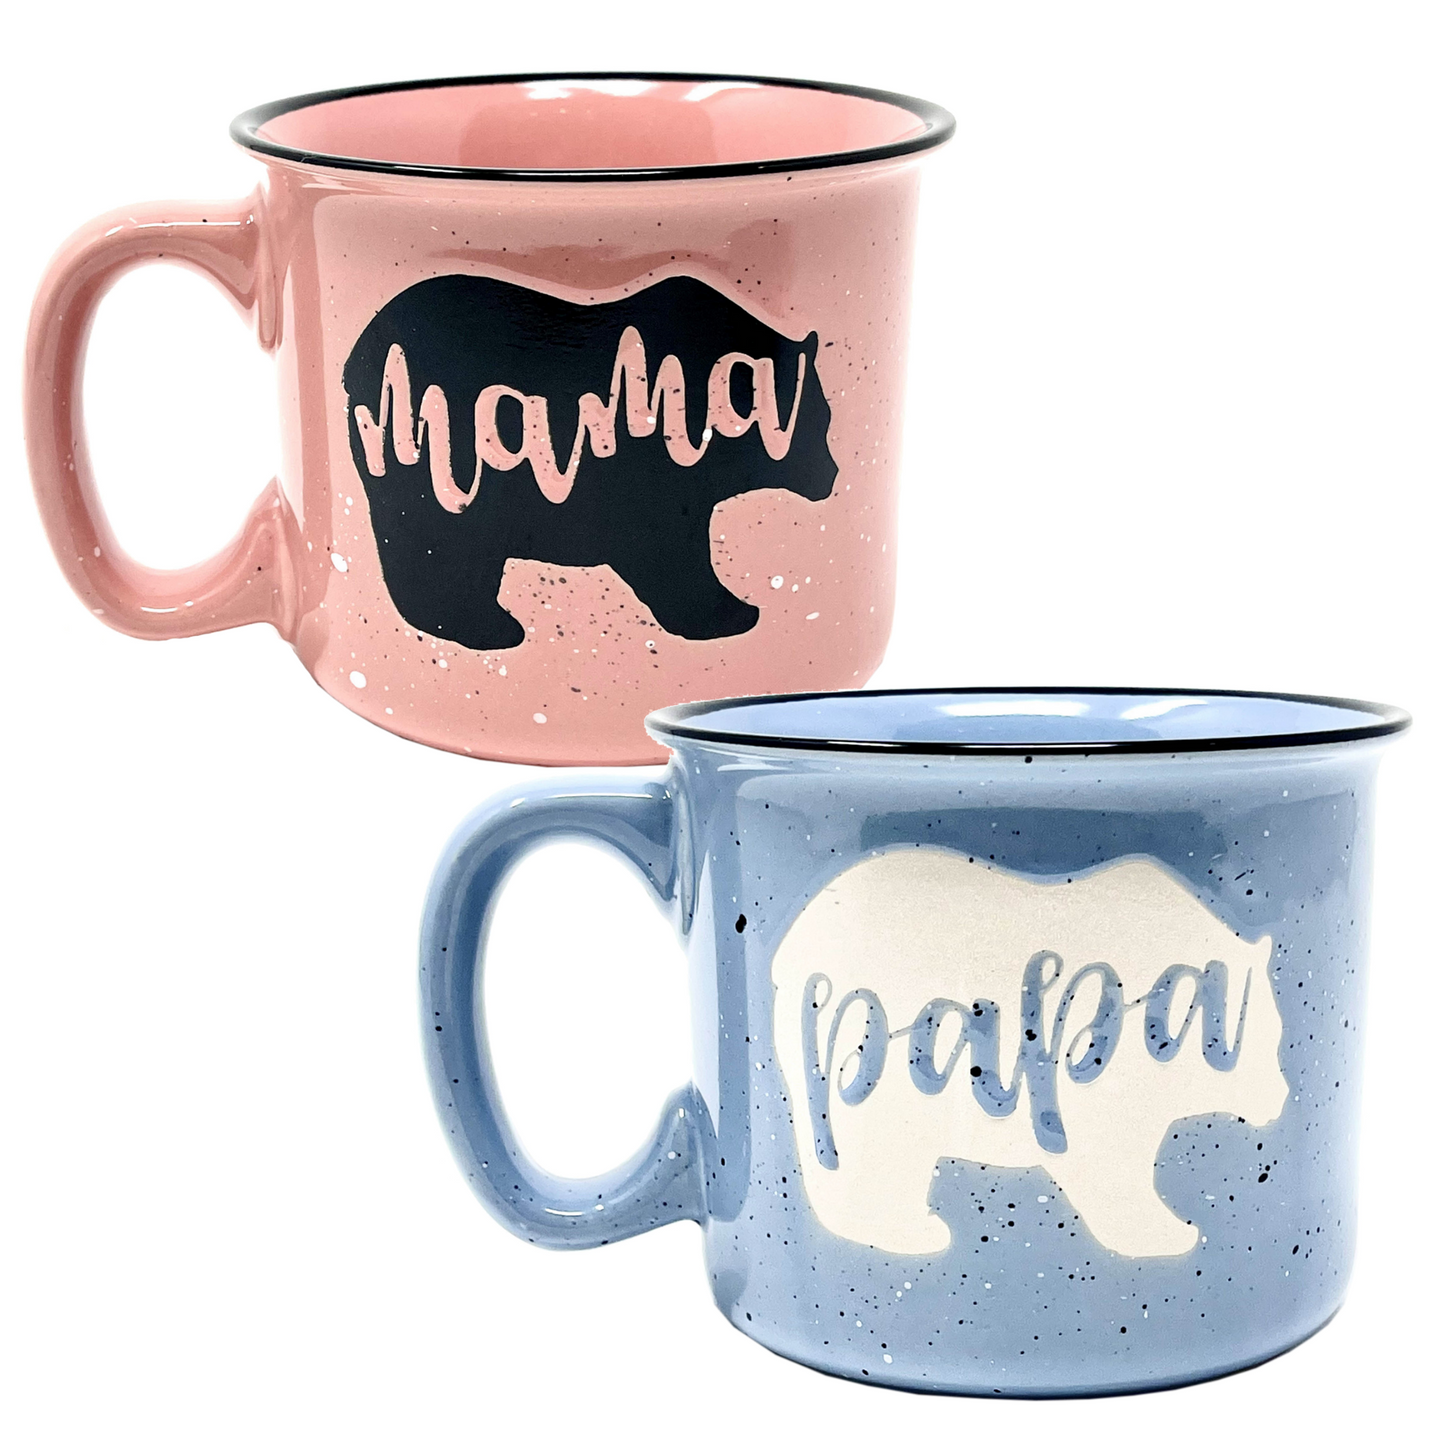 Mama Bear & Papa Bear Coffee Mug - Cute Coffee Cups for Men and Women - Unique Fun Gifts for Him, Her, Mother's Day, Father's Day, Christmas (Mama Bear Coral & Papa Bear Light Blue Gift Set)